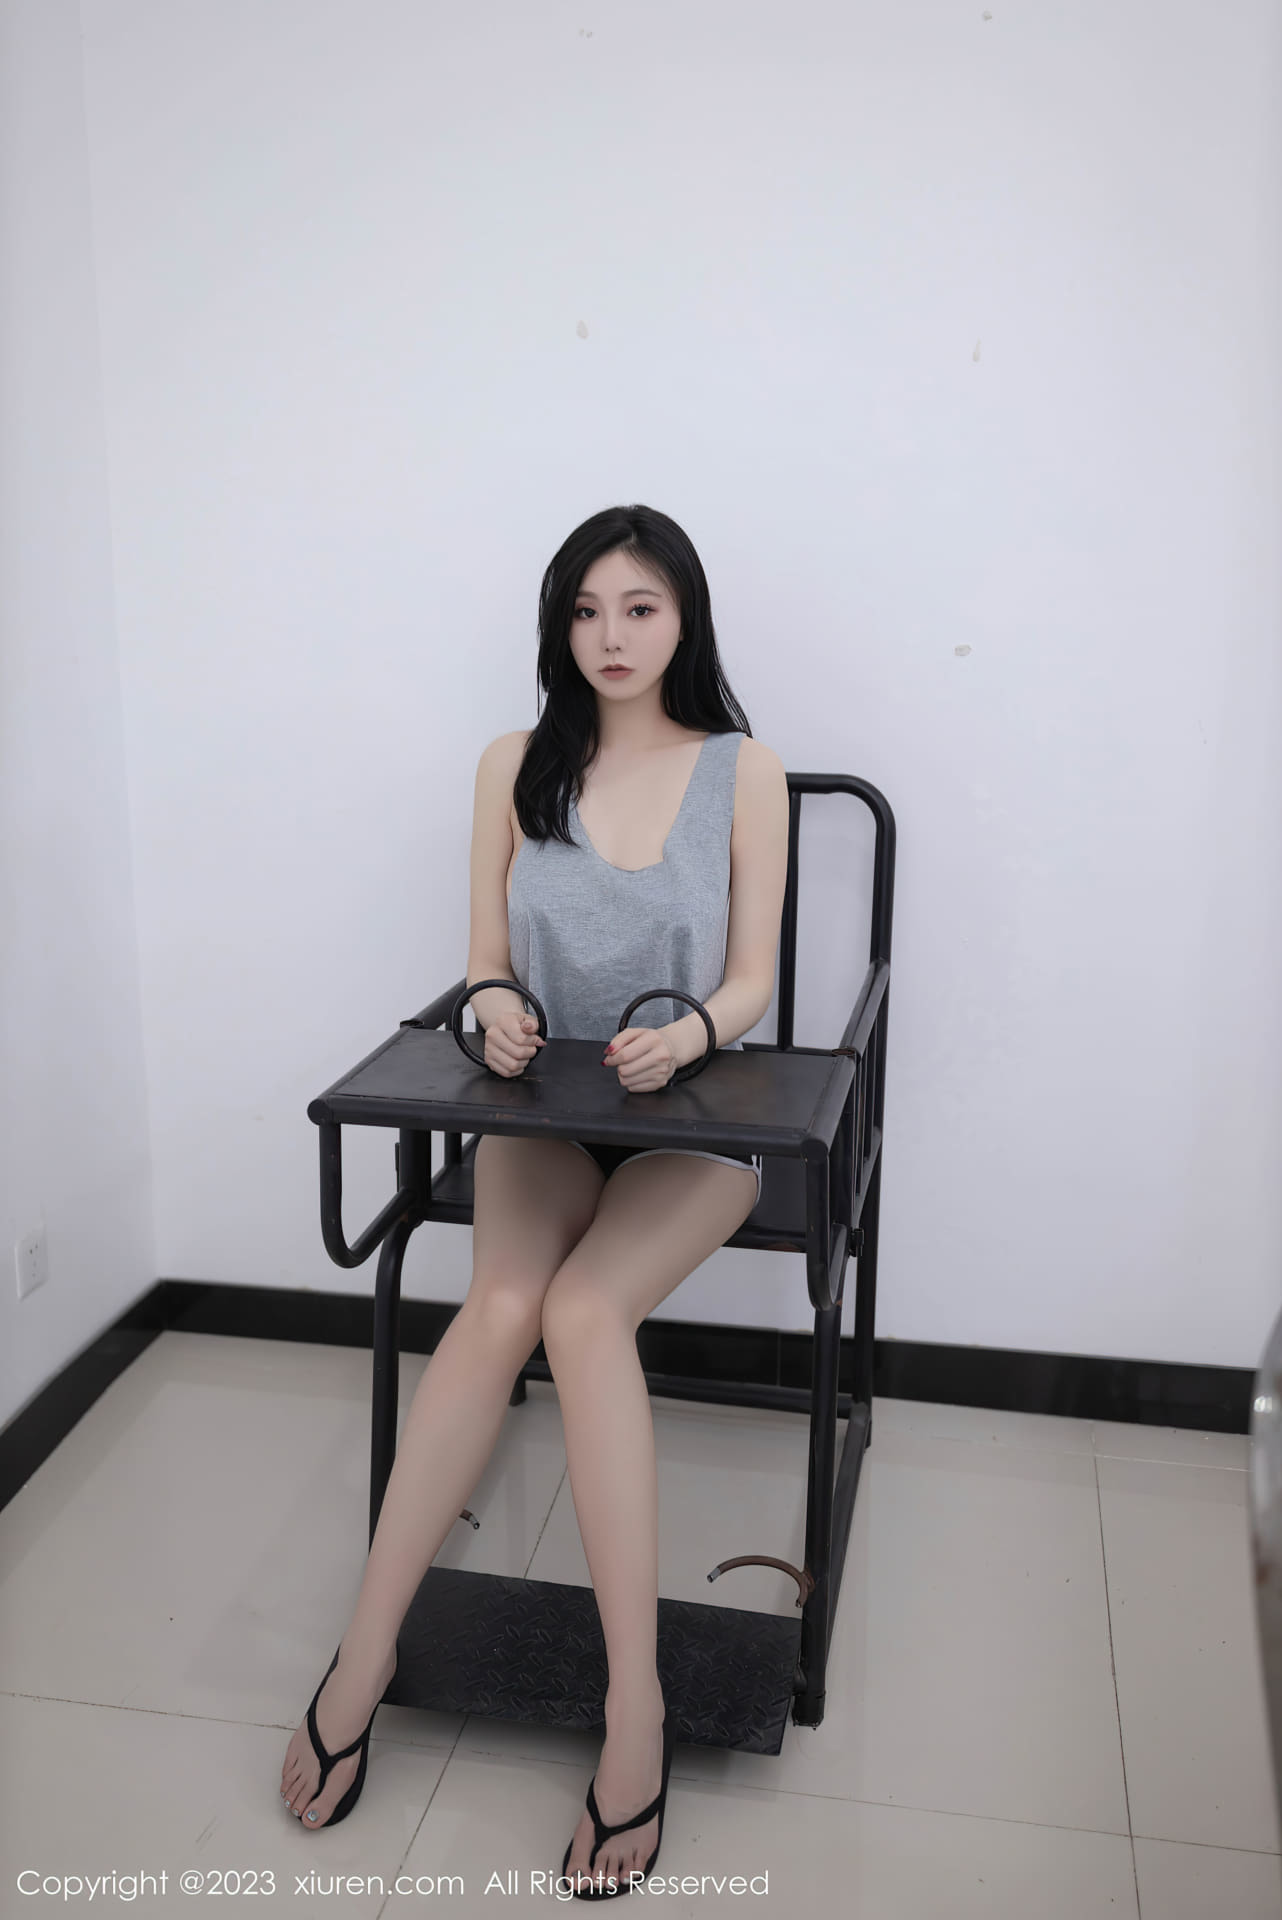 An Ran's women's interrogation room themed shooting, gray top and black shorts, shy appearance and dreamy appearance